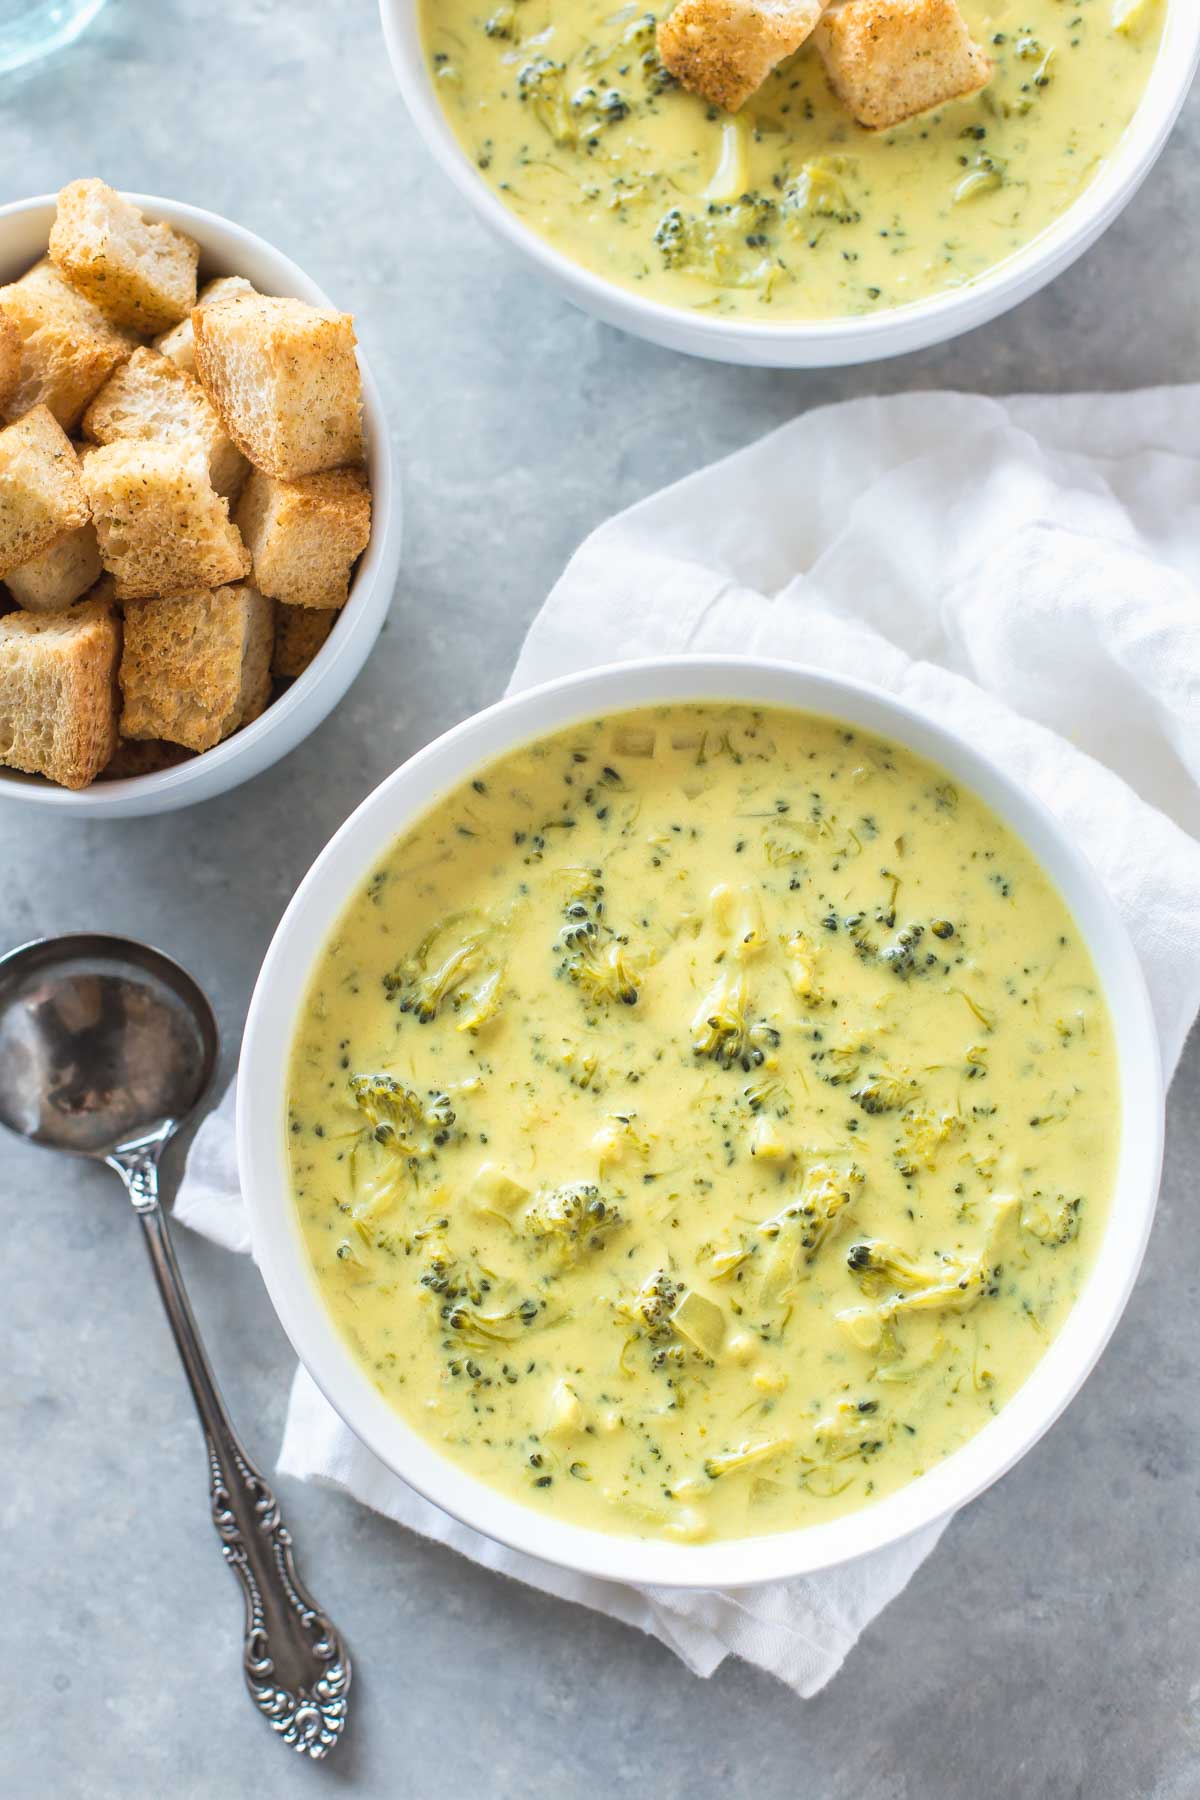 dairy free broccoli cheese soup in a white bowl next to an antique spoon with croutons in a bowl in the background.